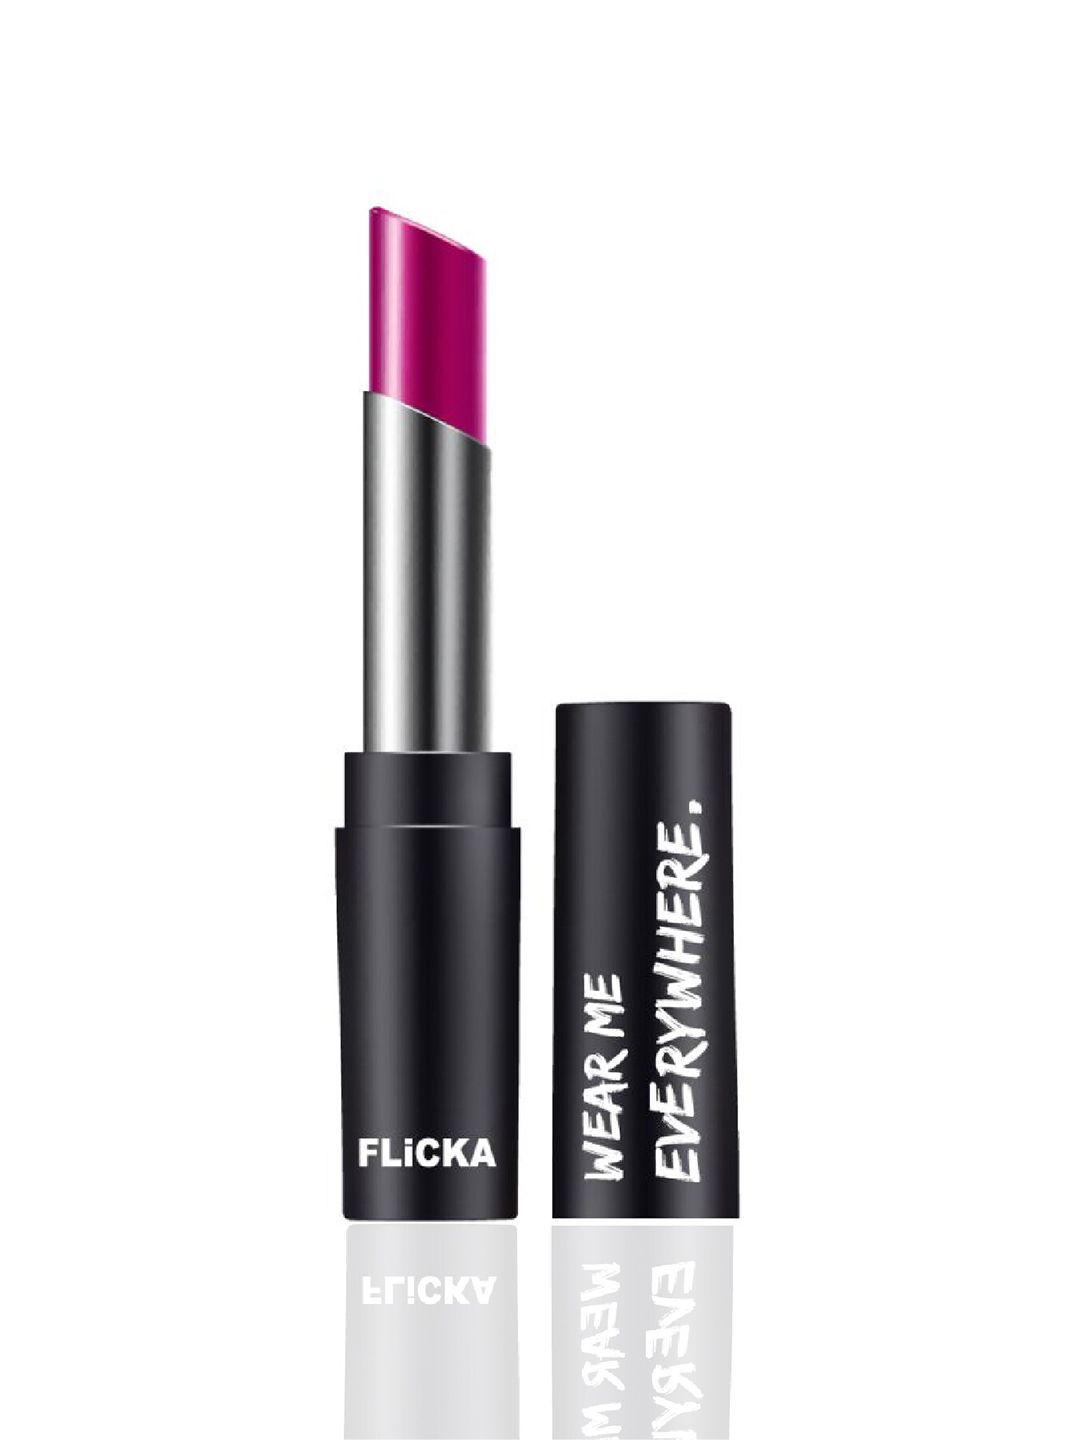 FLiCKA Wear Me Everywhere Creamy Matte Lipstick -  Celebrity Touch 21 Price in India